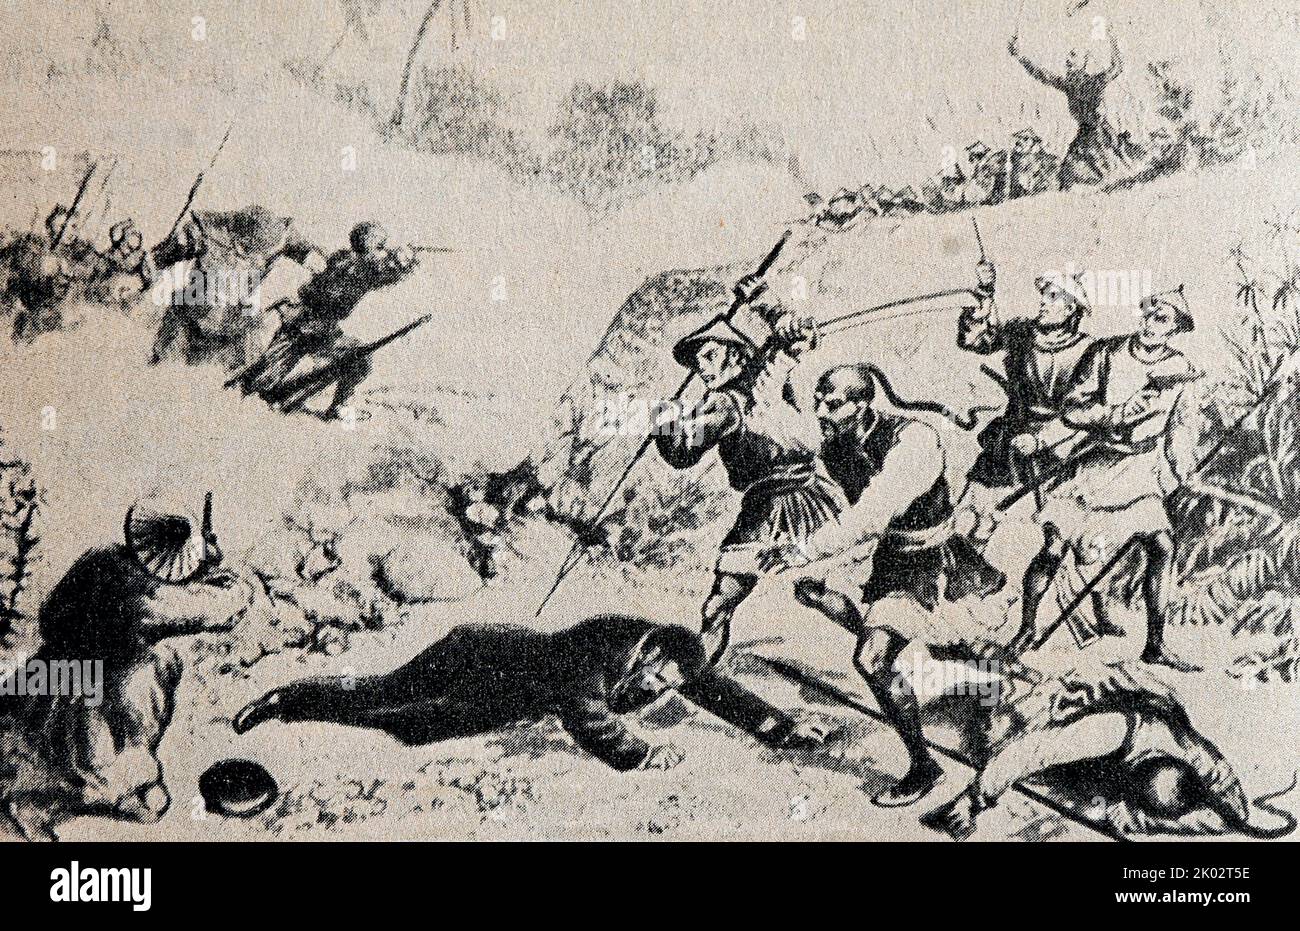 Fight of Vietnamese partisans against French colonialists. Stock Photo